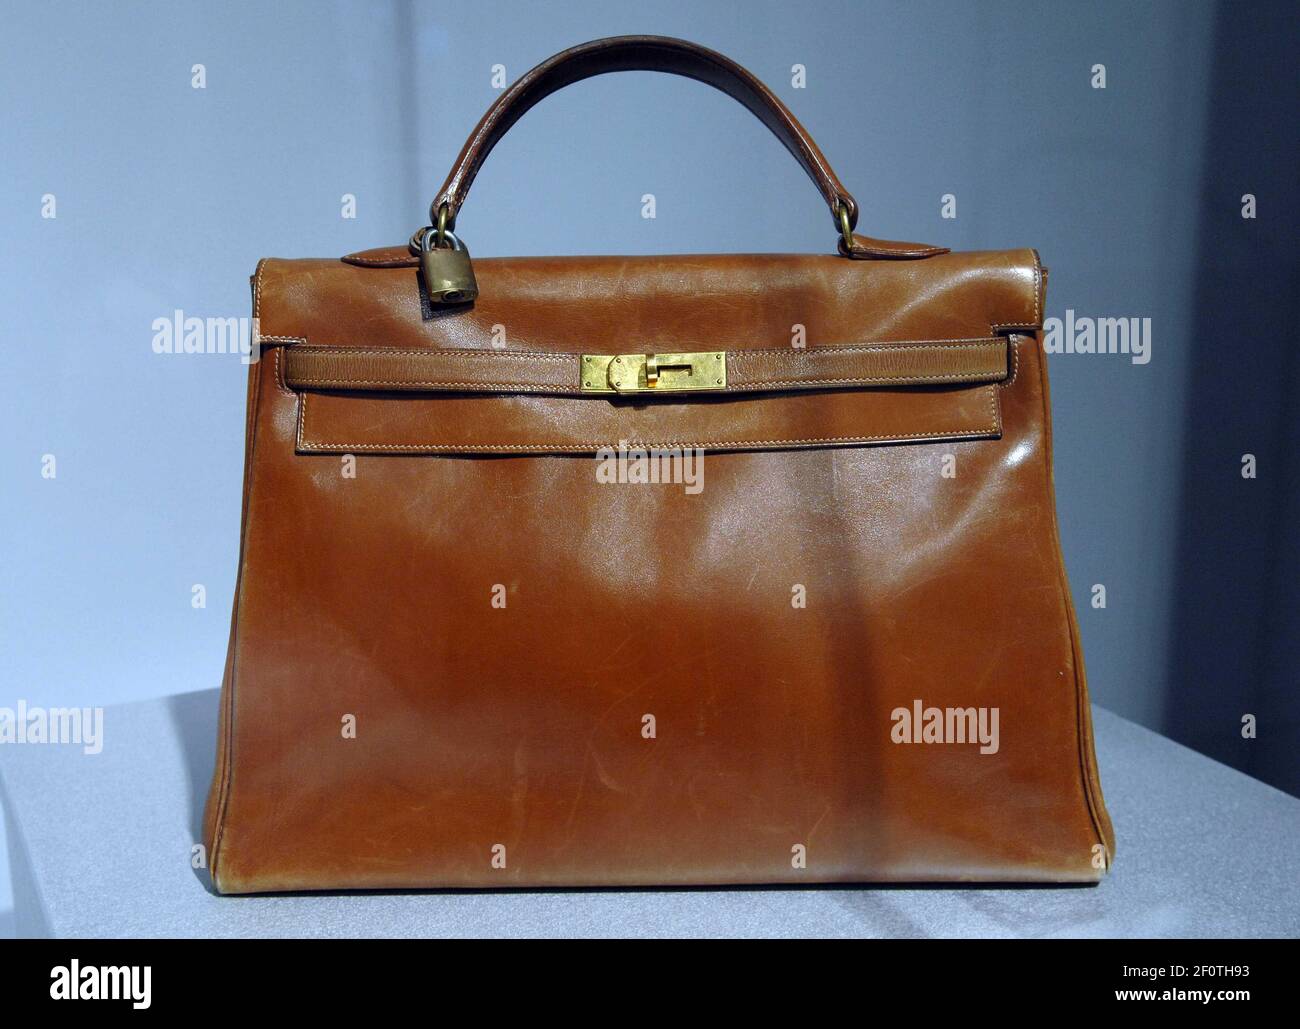 15 October 2007 - New York , NY - Grace Kelly's brown leather